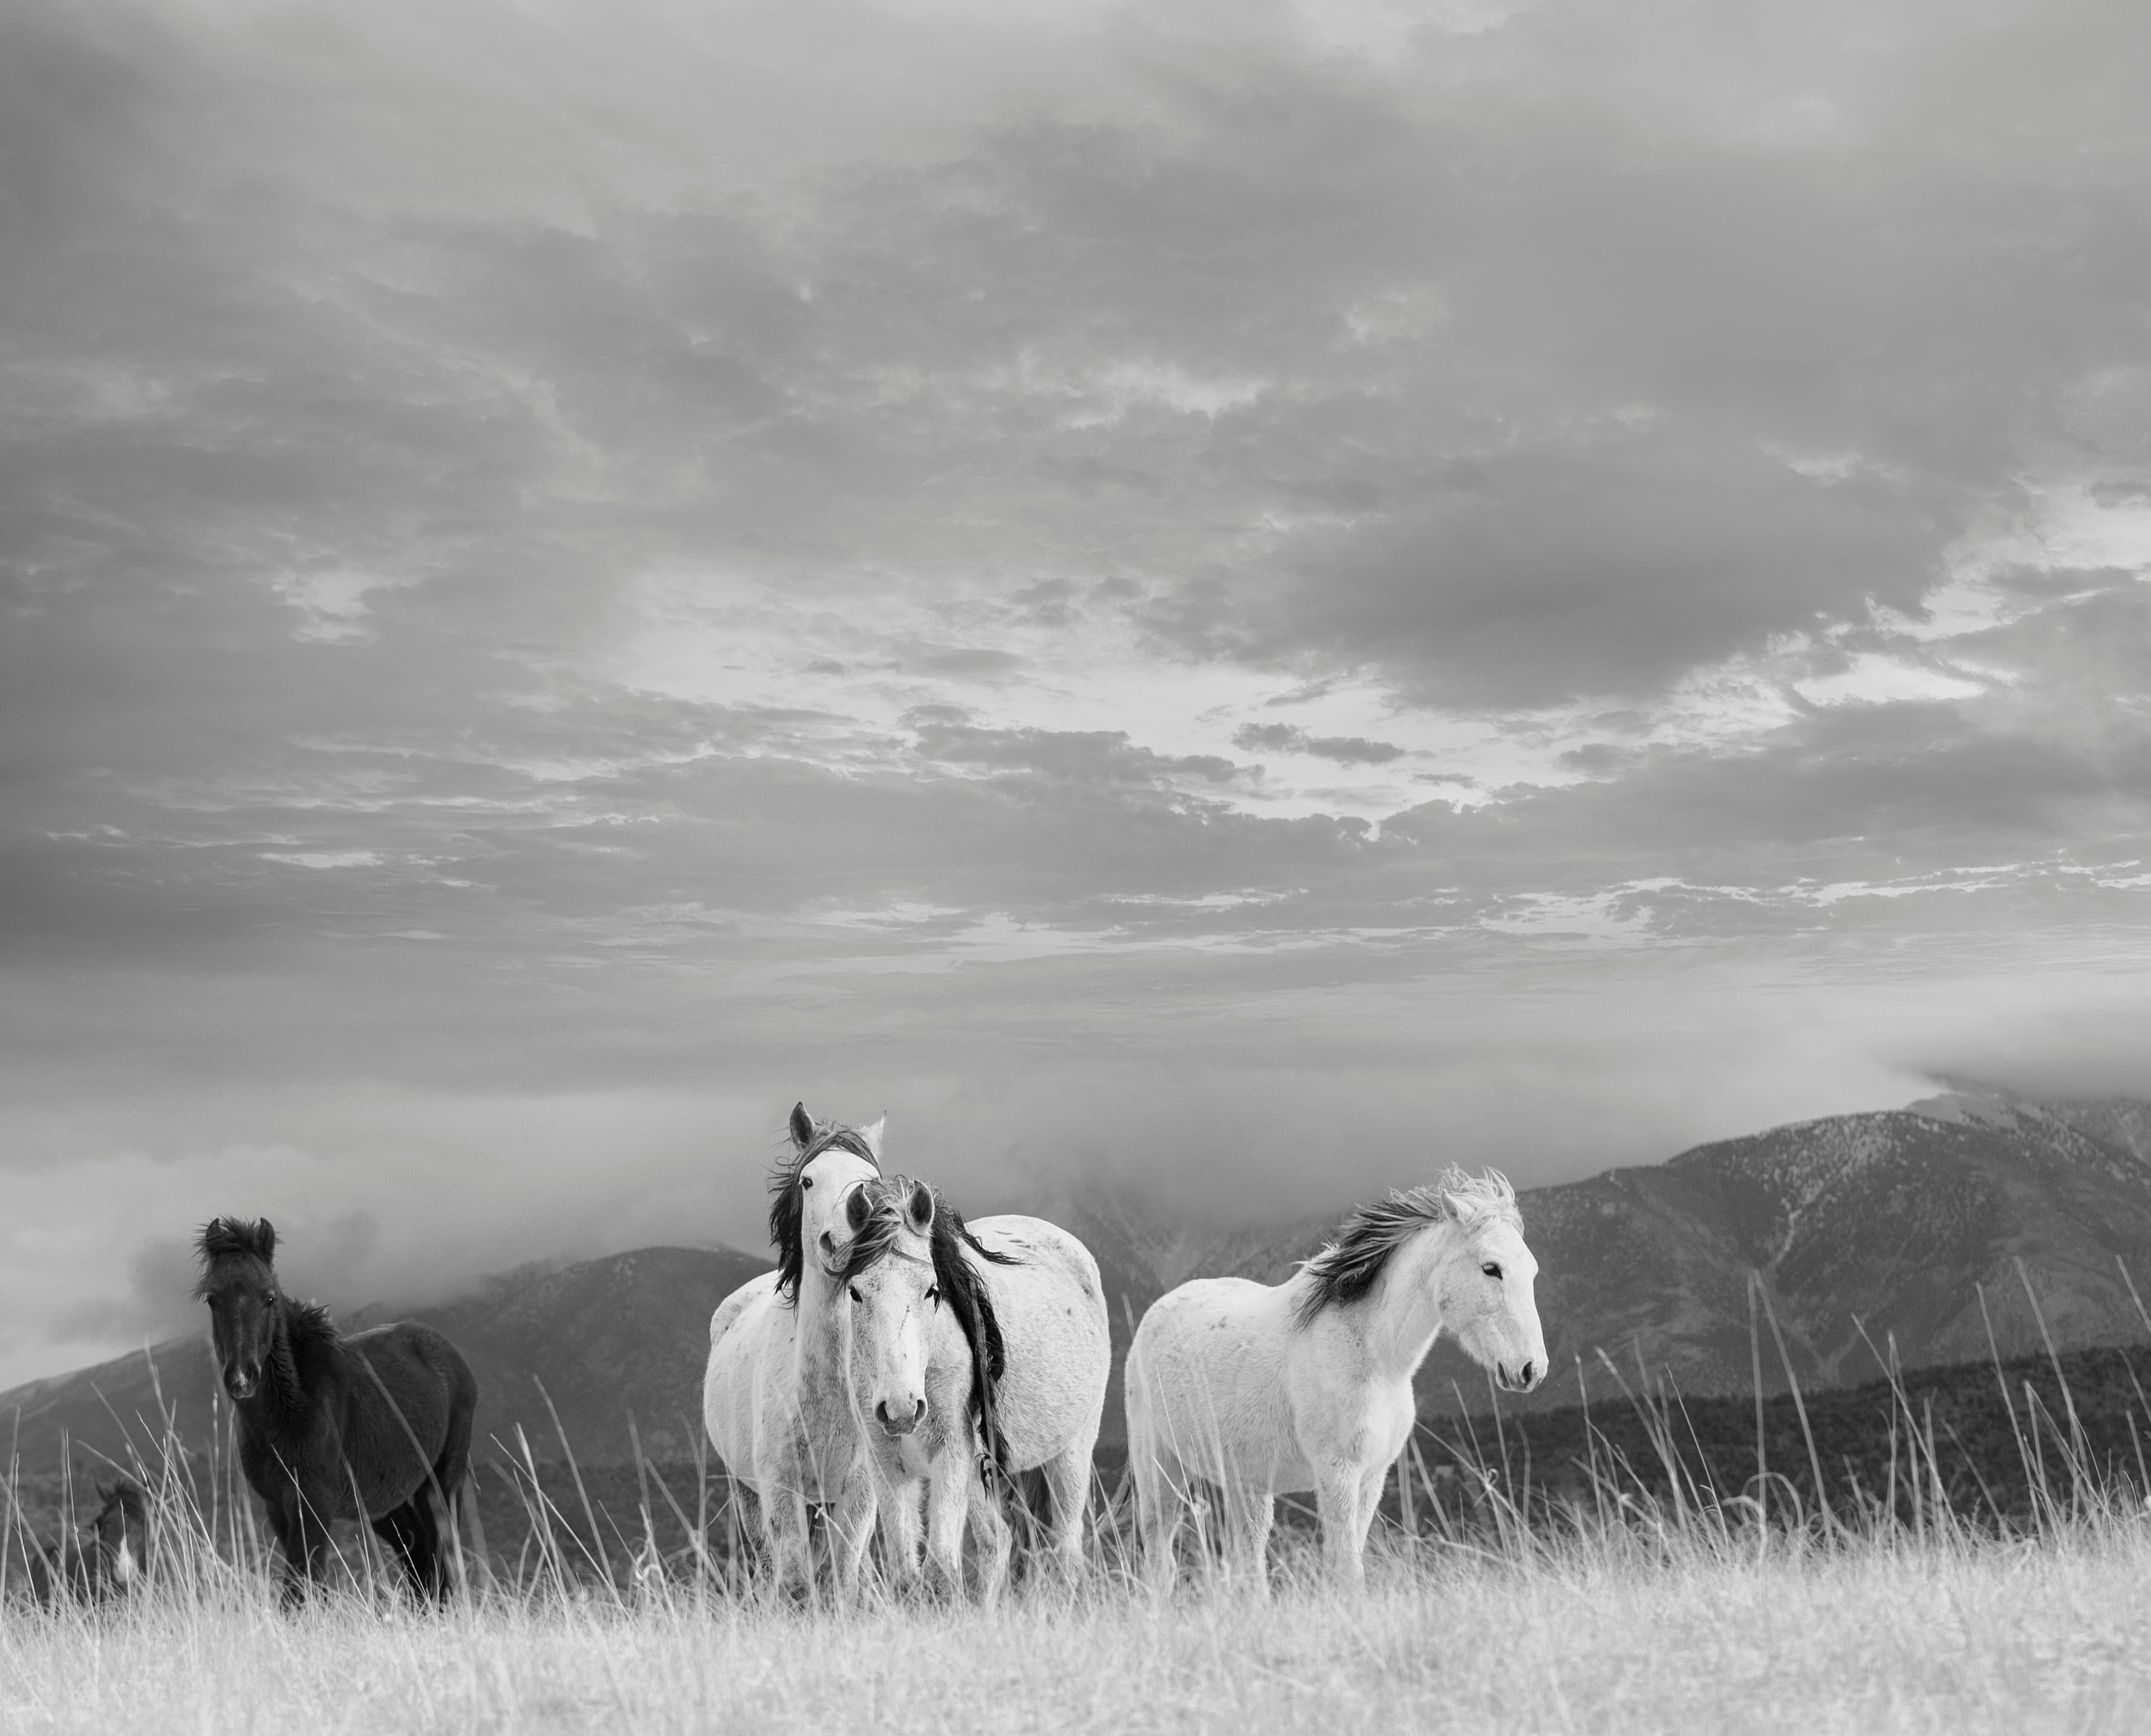 Shane Russeck Animal Print - 36x48 "White Mountain Mustangs" Black and White Photography Wild Horses Unsigned